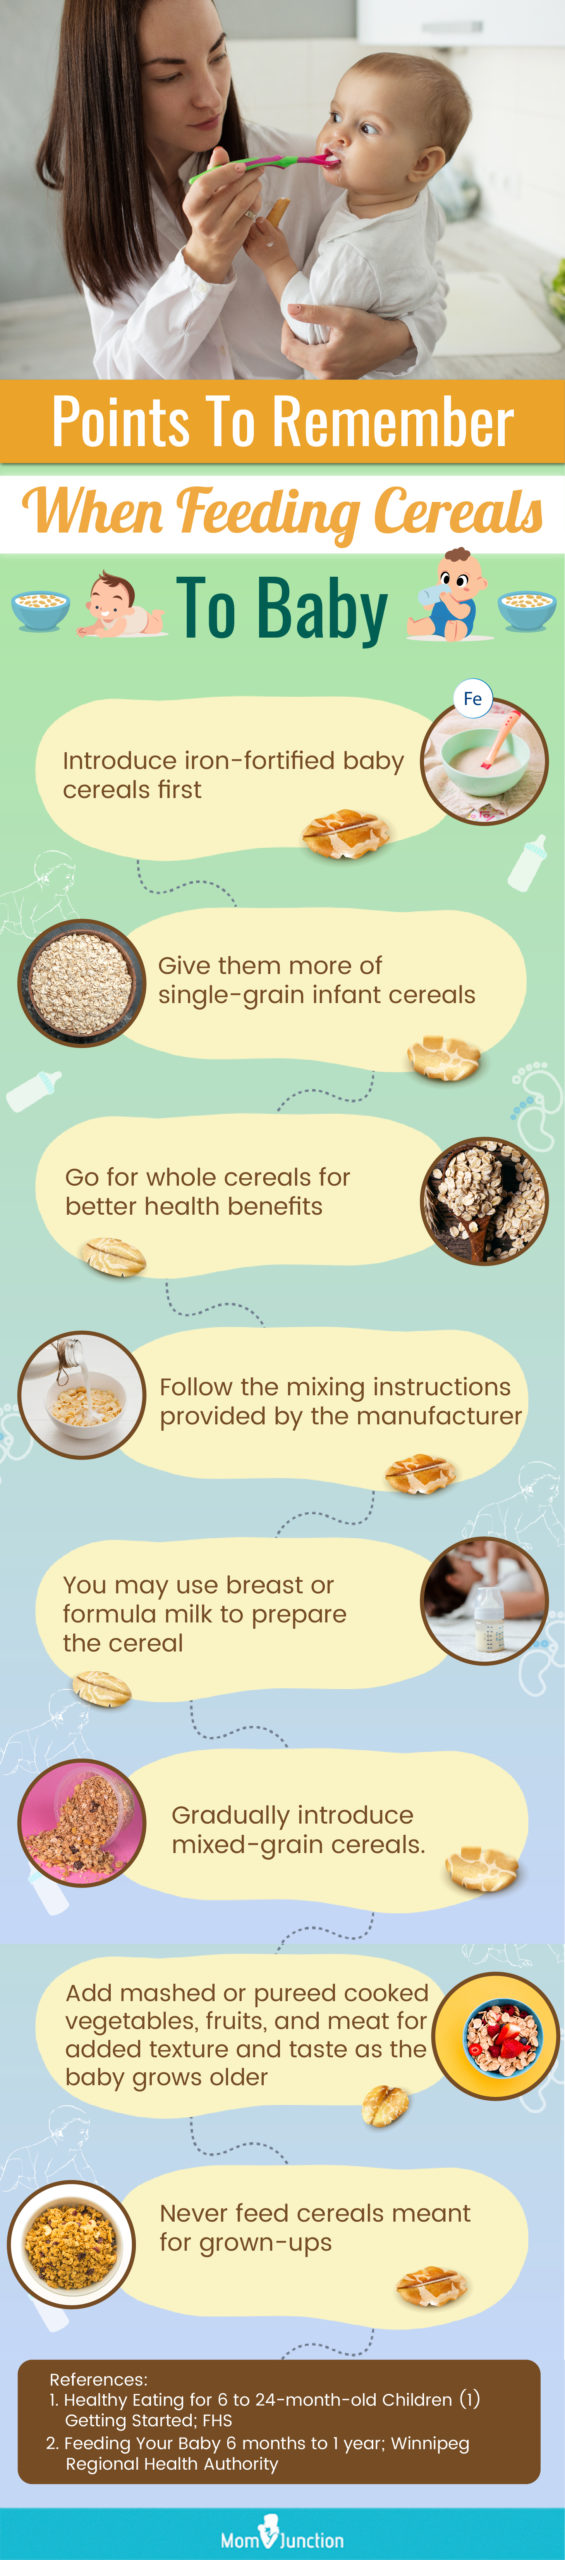 Points To Remember When Feeding Cereals To Baby (infographic)